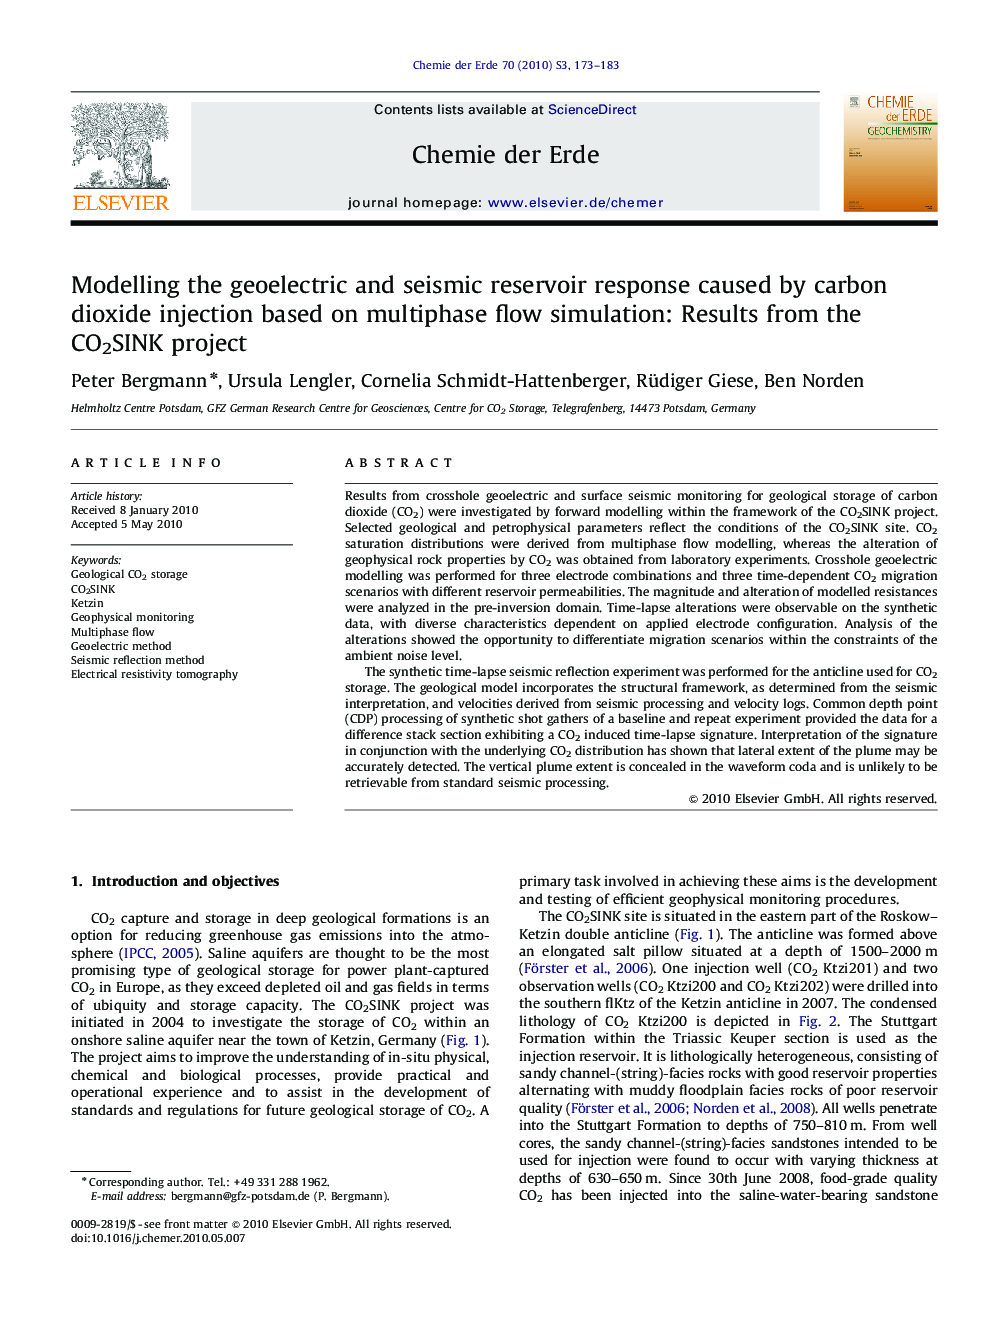 Modelling the geoelectric and seismic reservoir response caused by carbon dioxide injection based on multiphase flow simulation: Results from the CO2SINK project